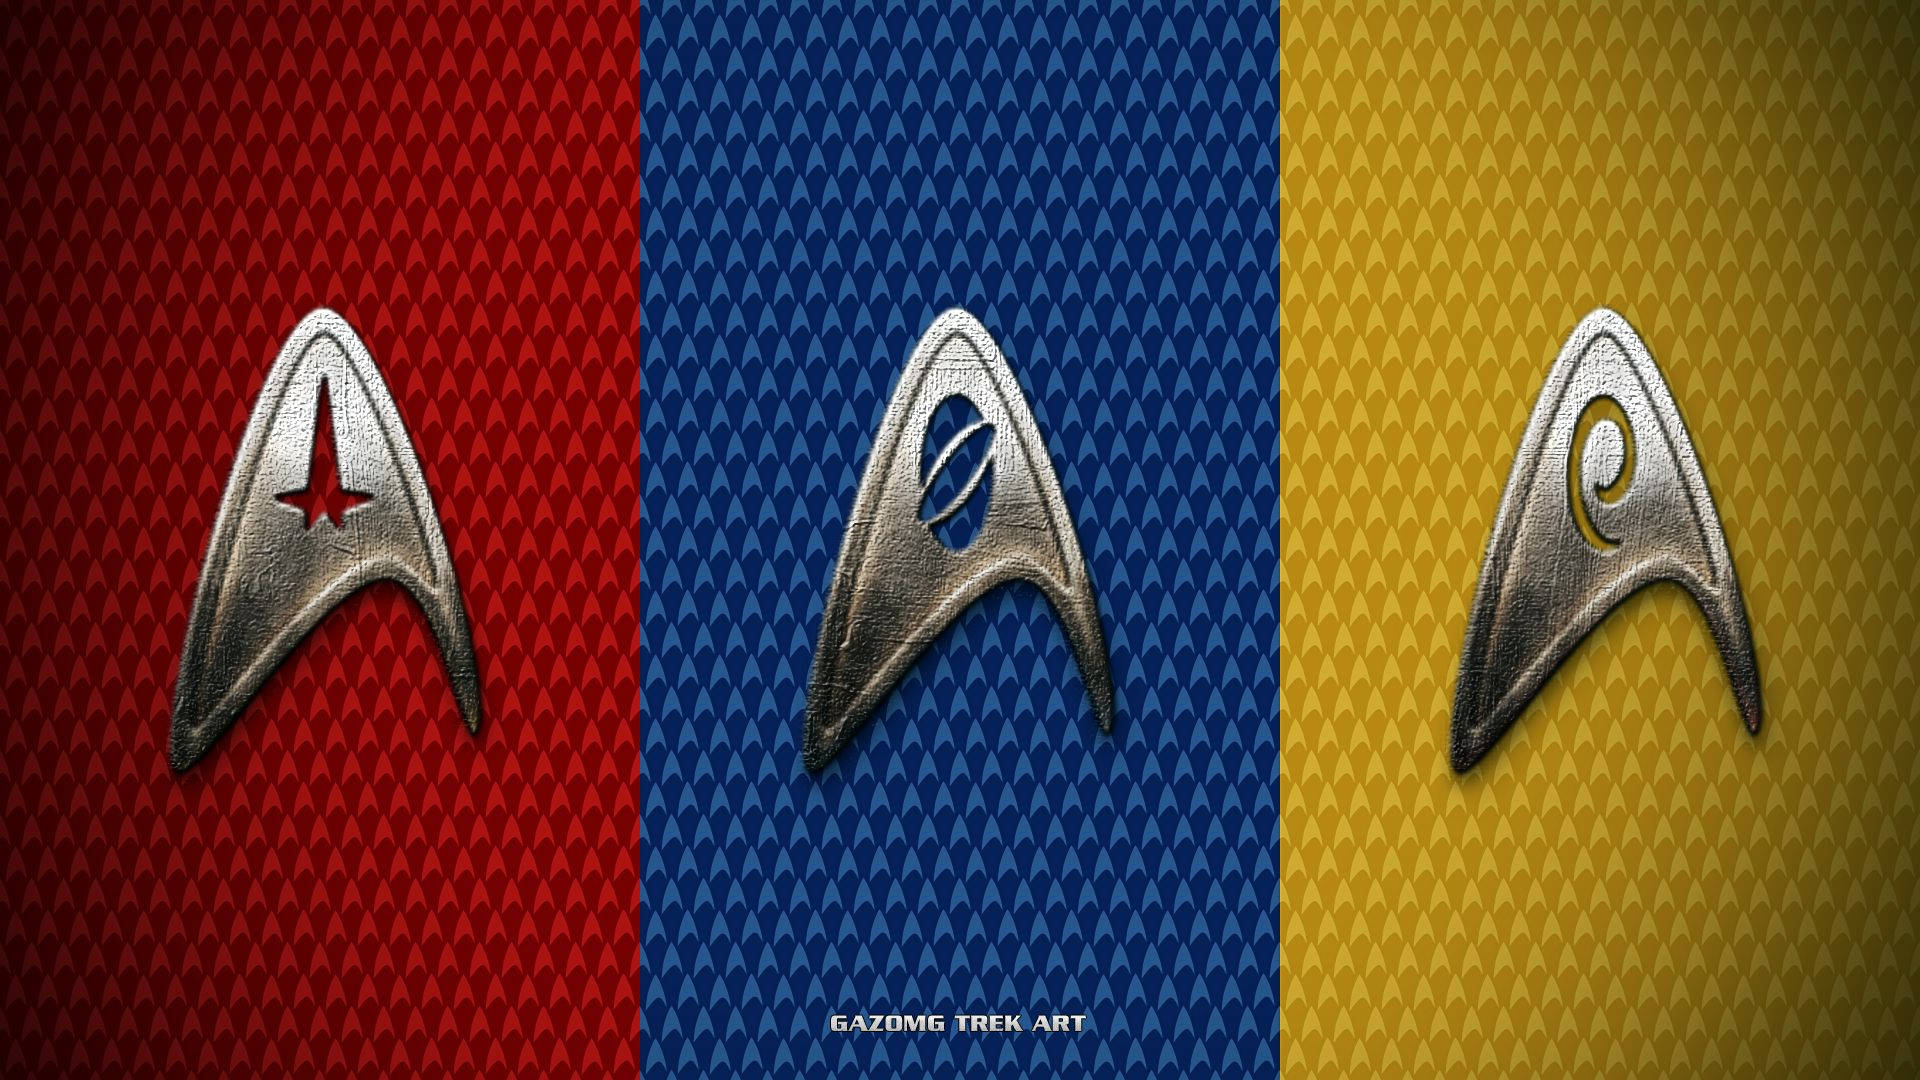 Wallpaper of Star Trek logos with different background color.  